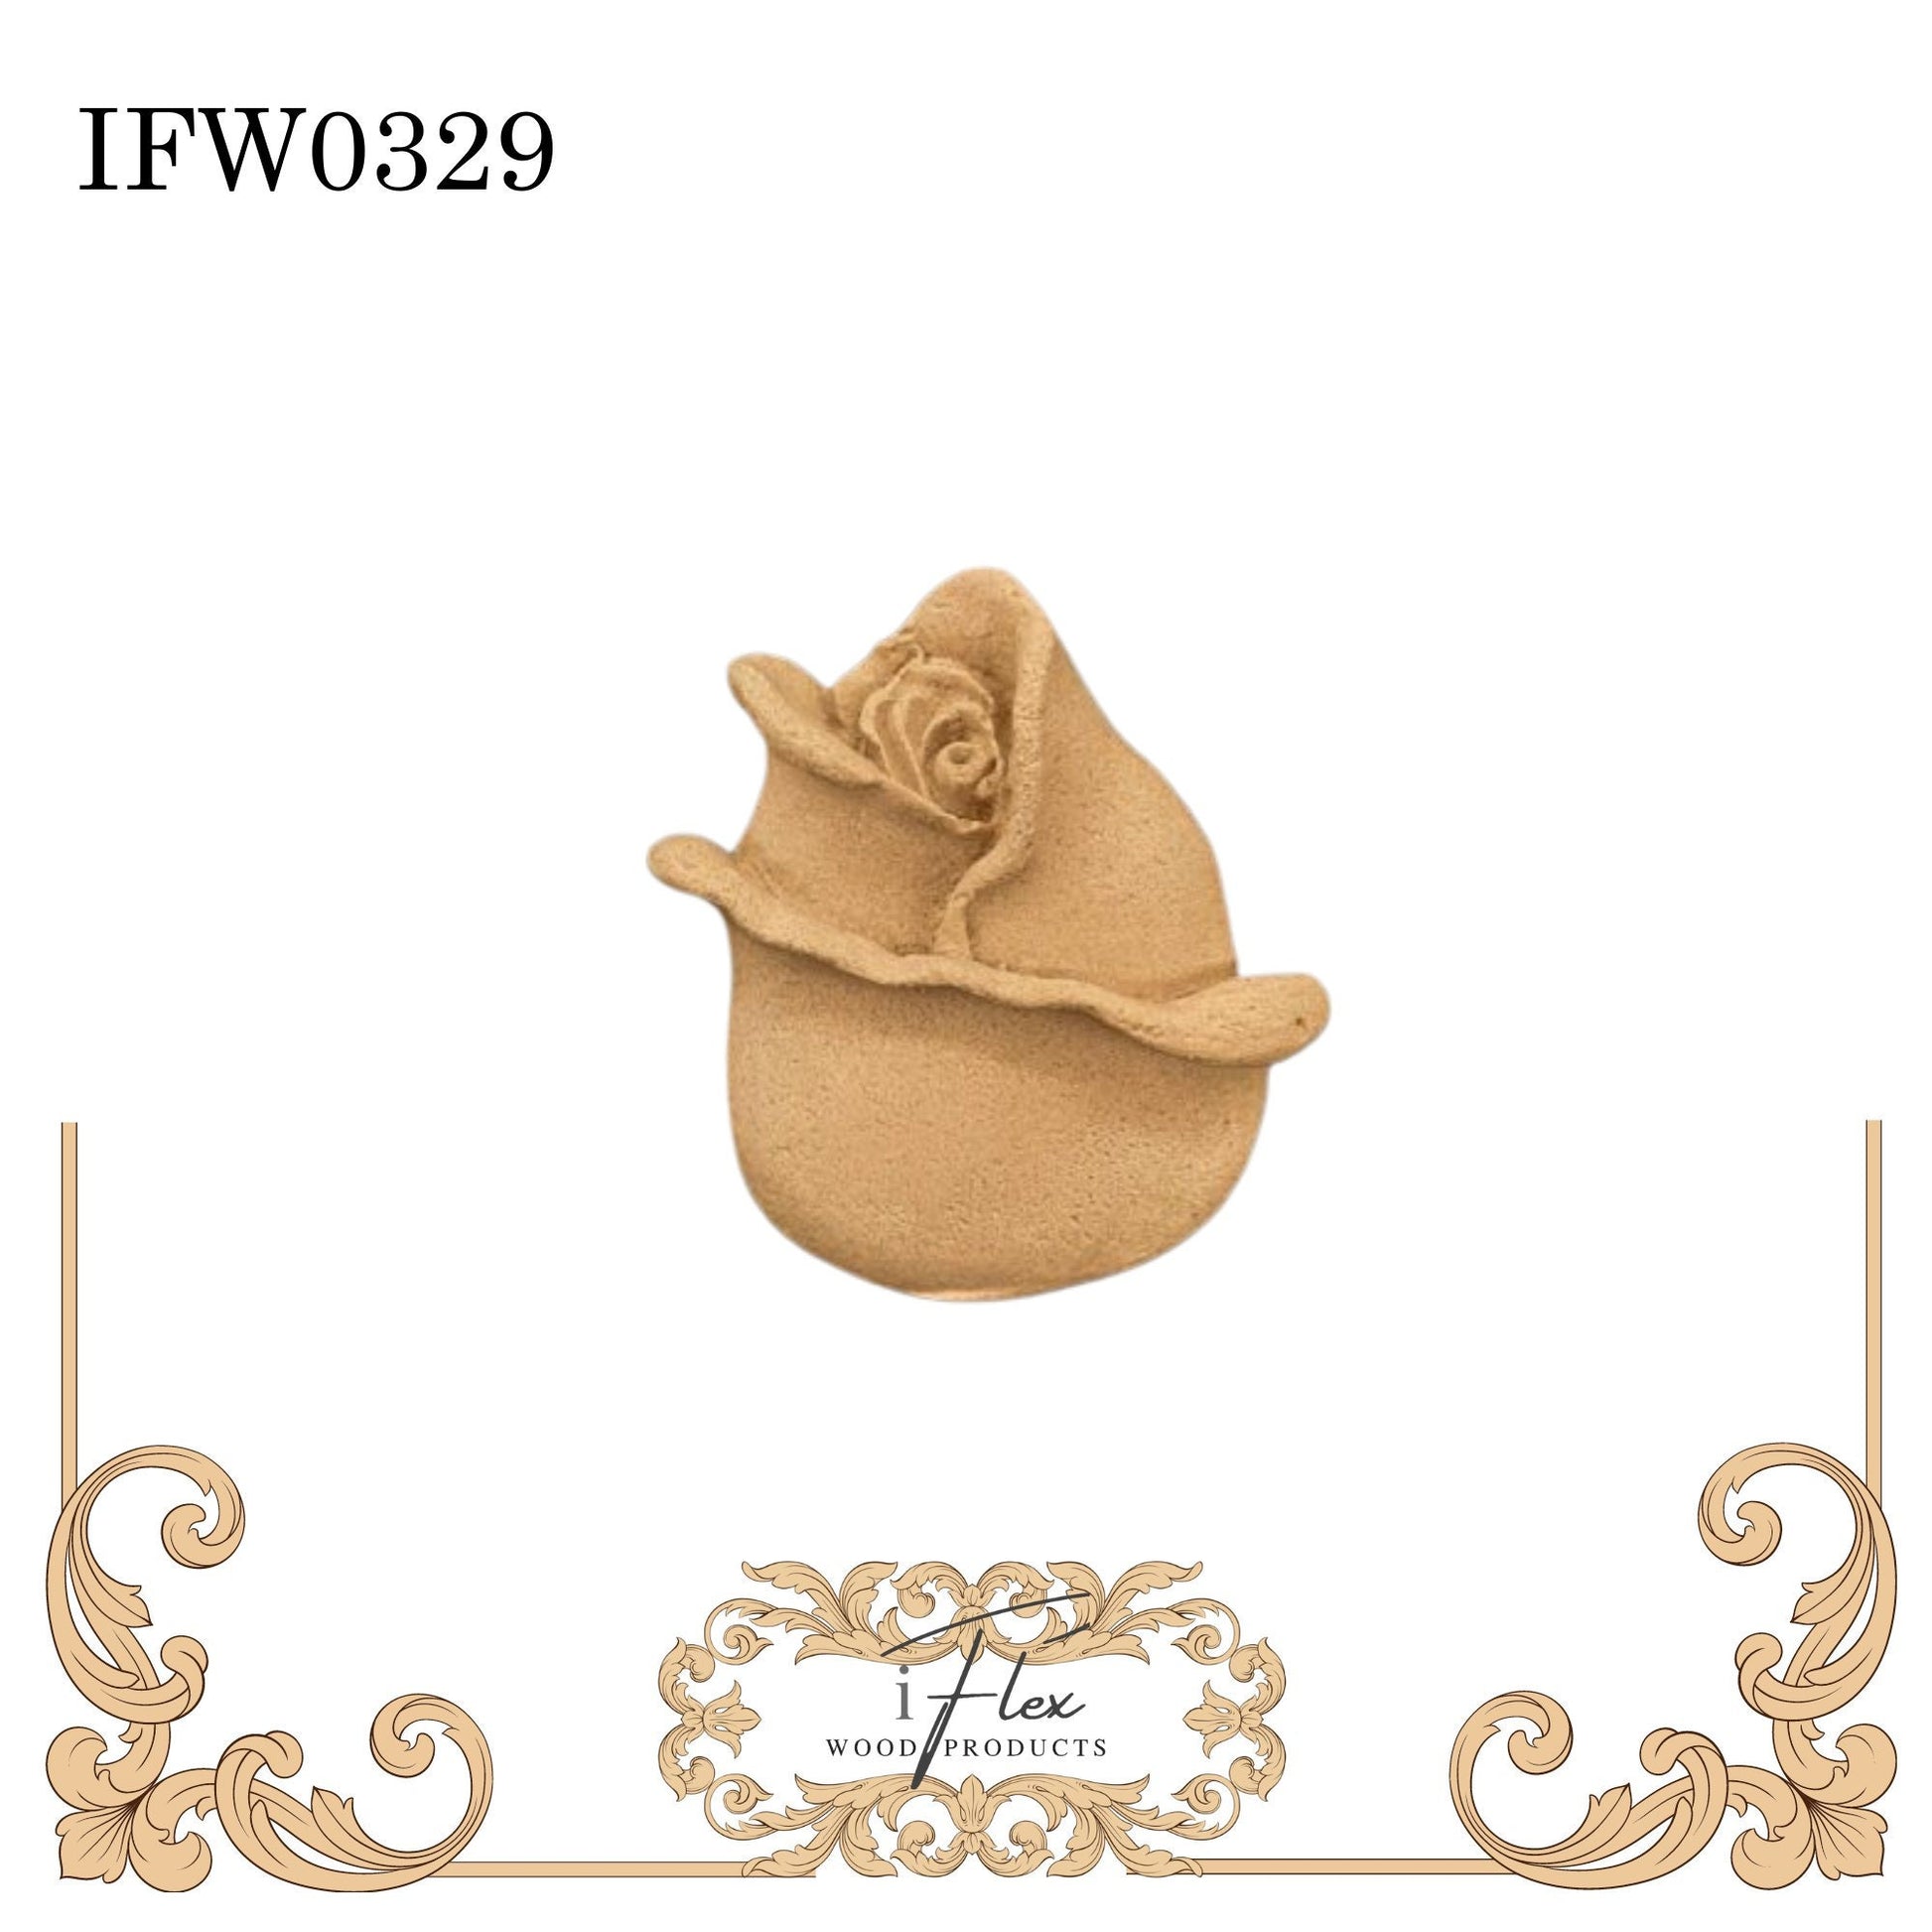 IFW 0329  iFlex Wood Products Flower bendable mouldings, flexible, wooden appliques